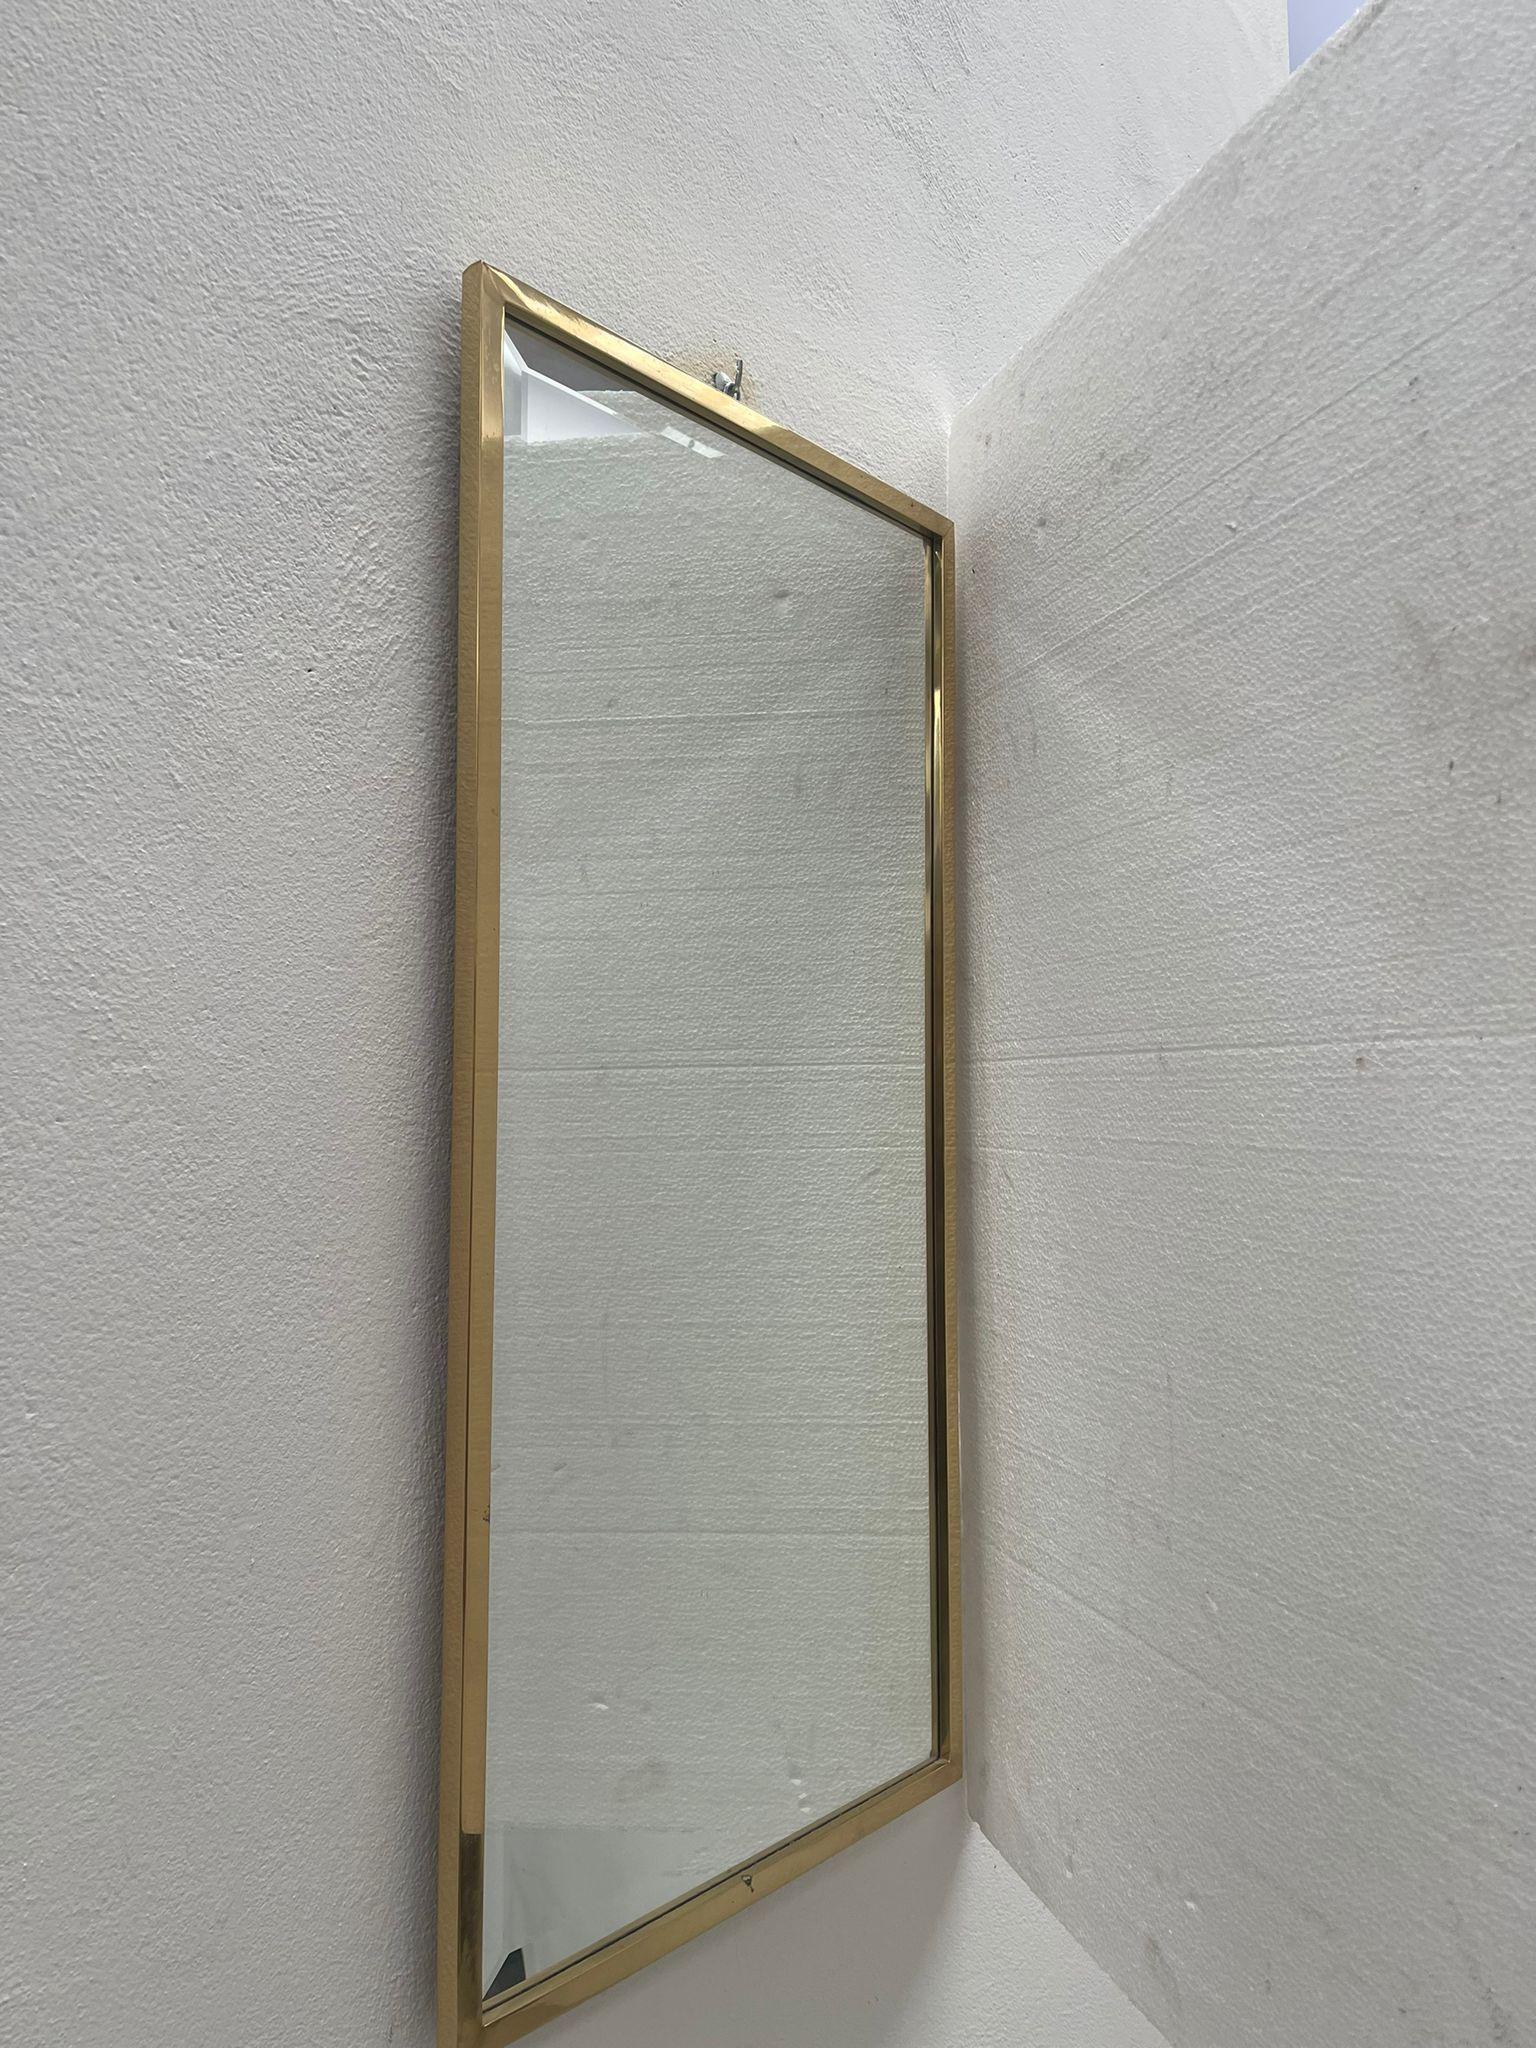 19th Gold Mirror In Excellent Condition For Sale In Cantù, IT